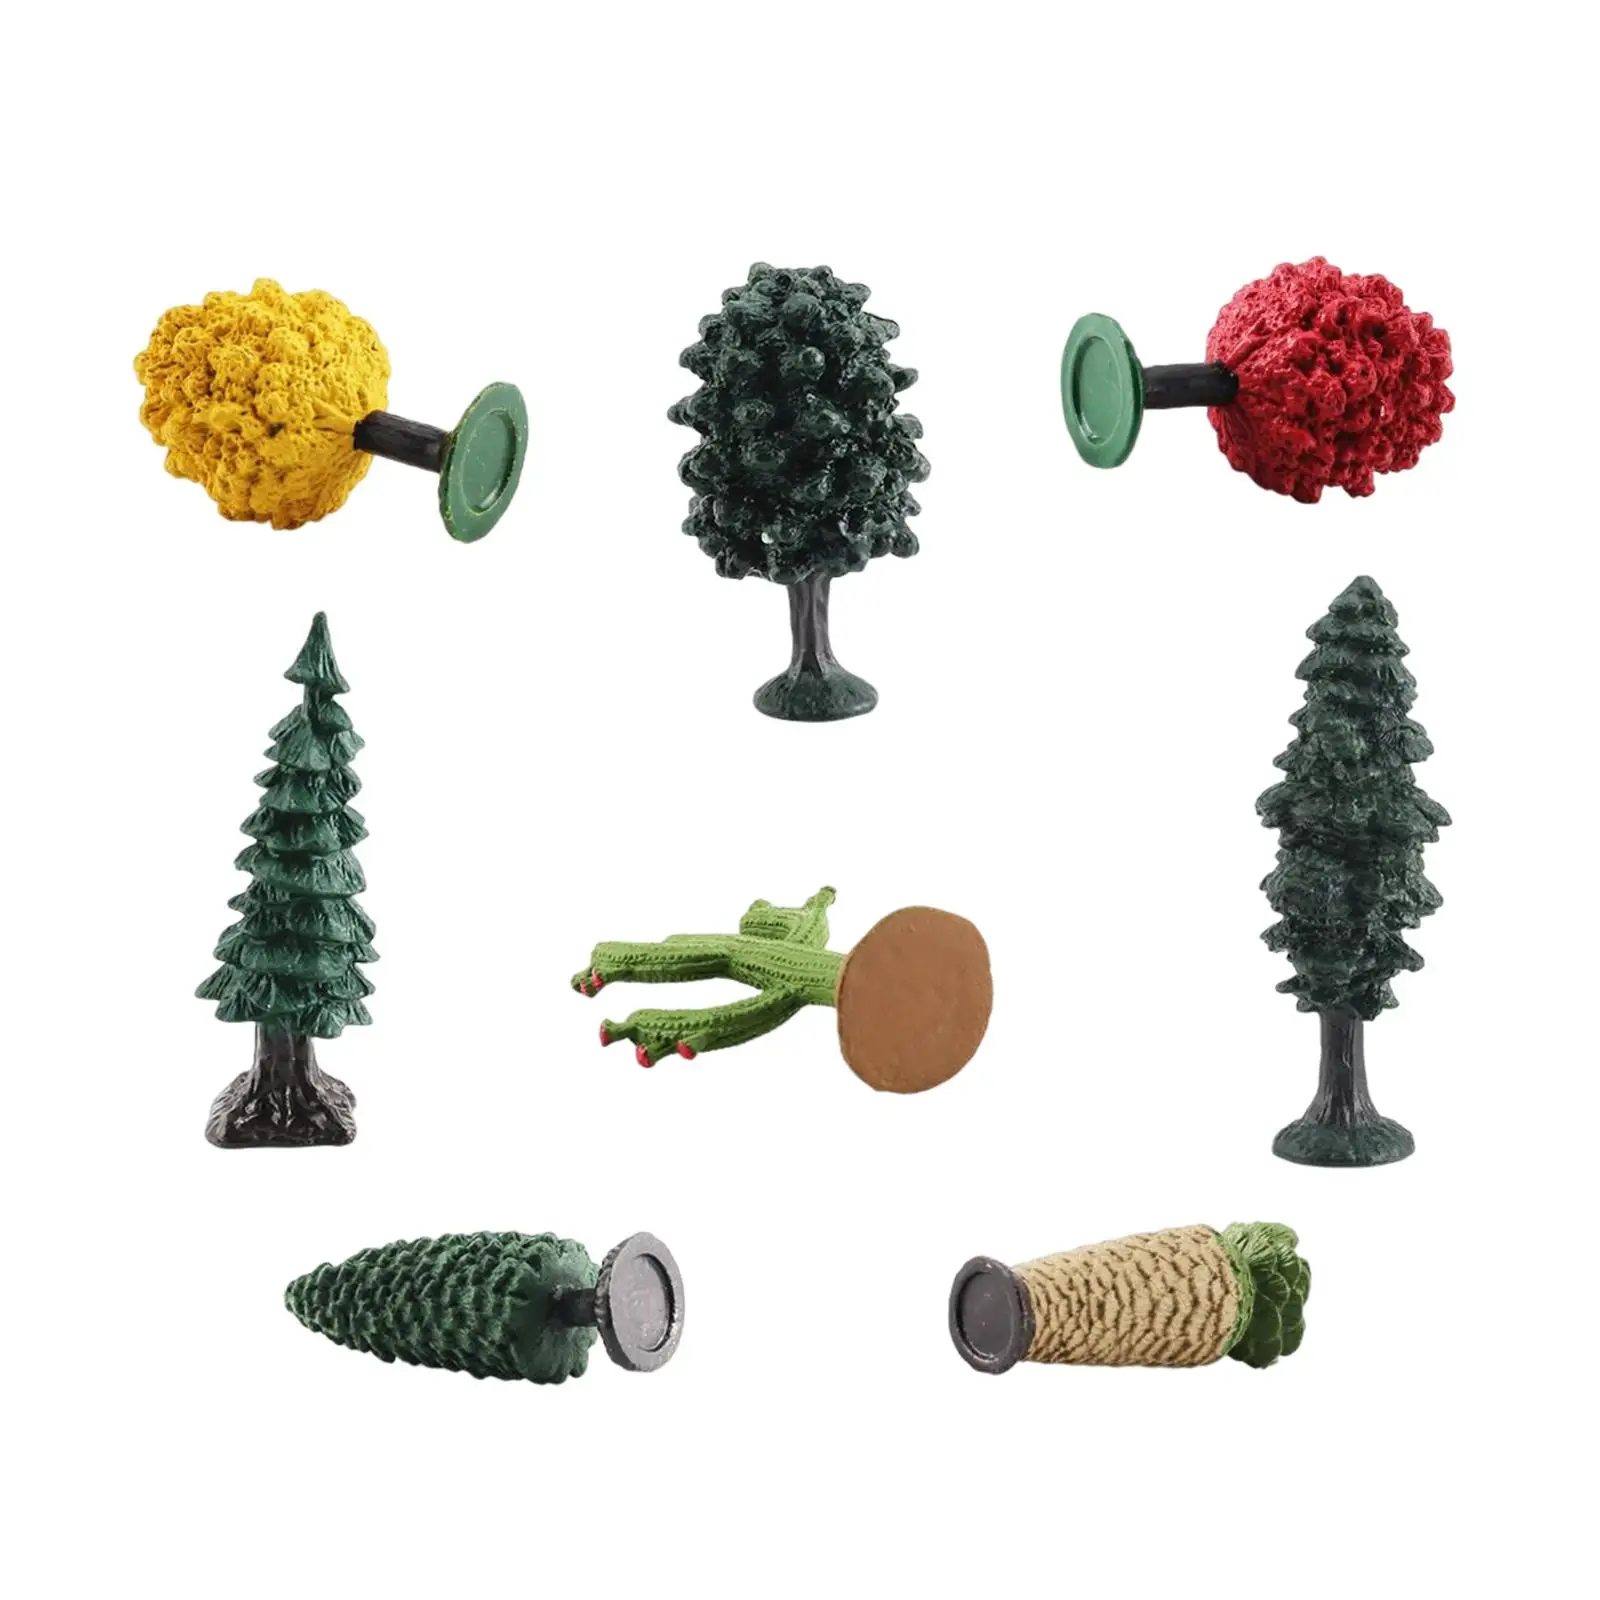 8 Pieces Miniature Trees Model Sculpture for Micro Landscape Sand Table Toddlers Unisex